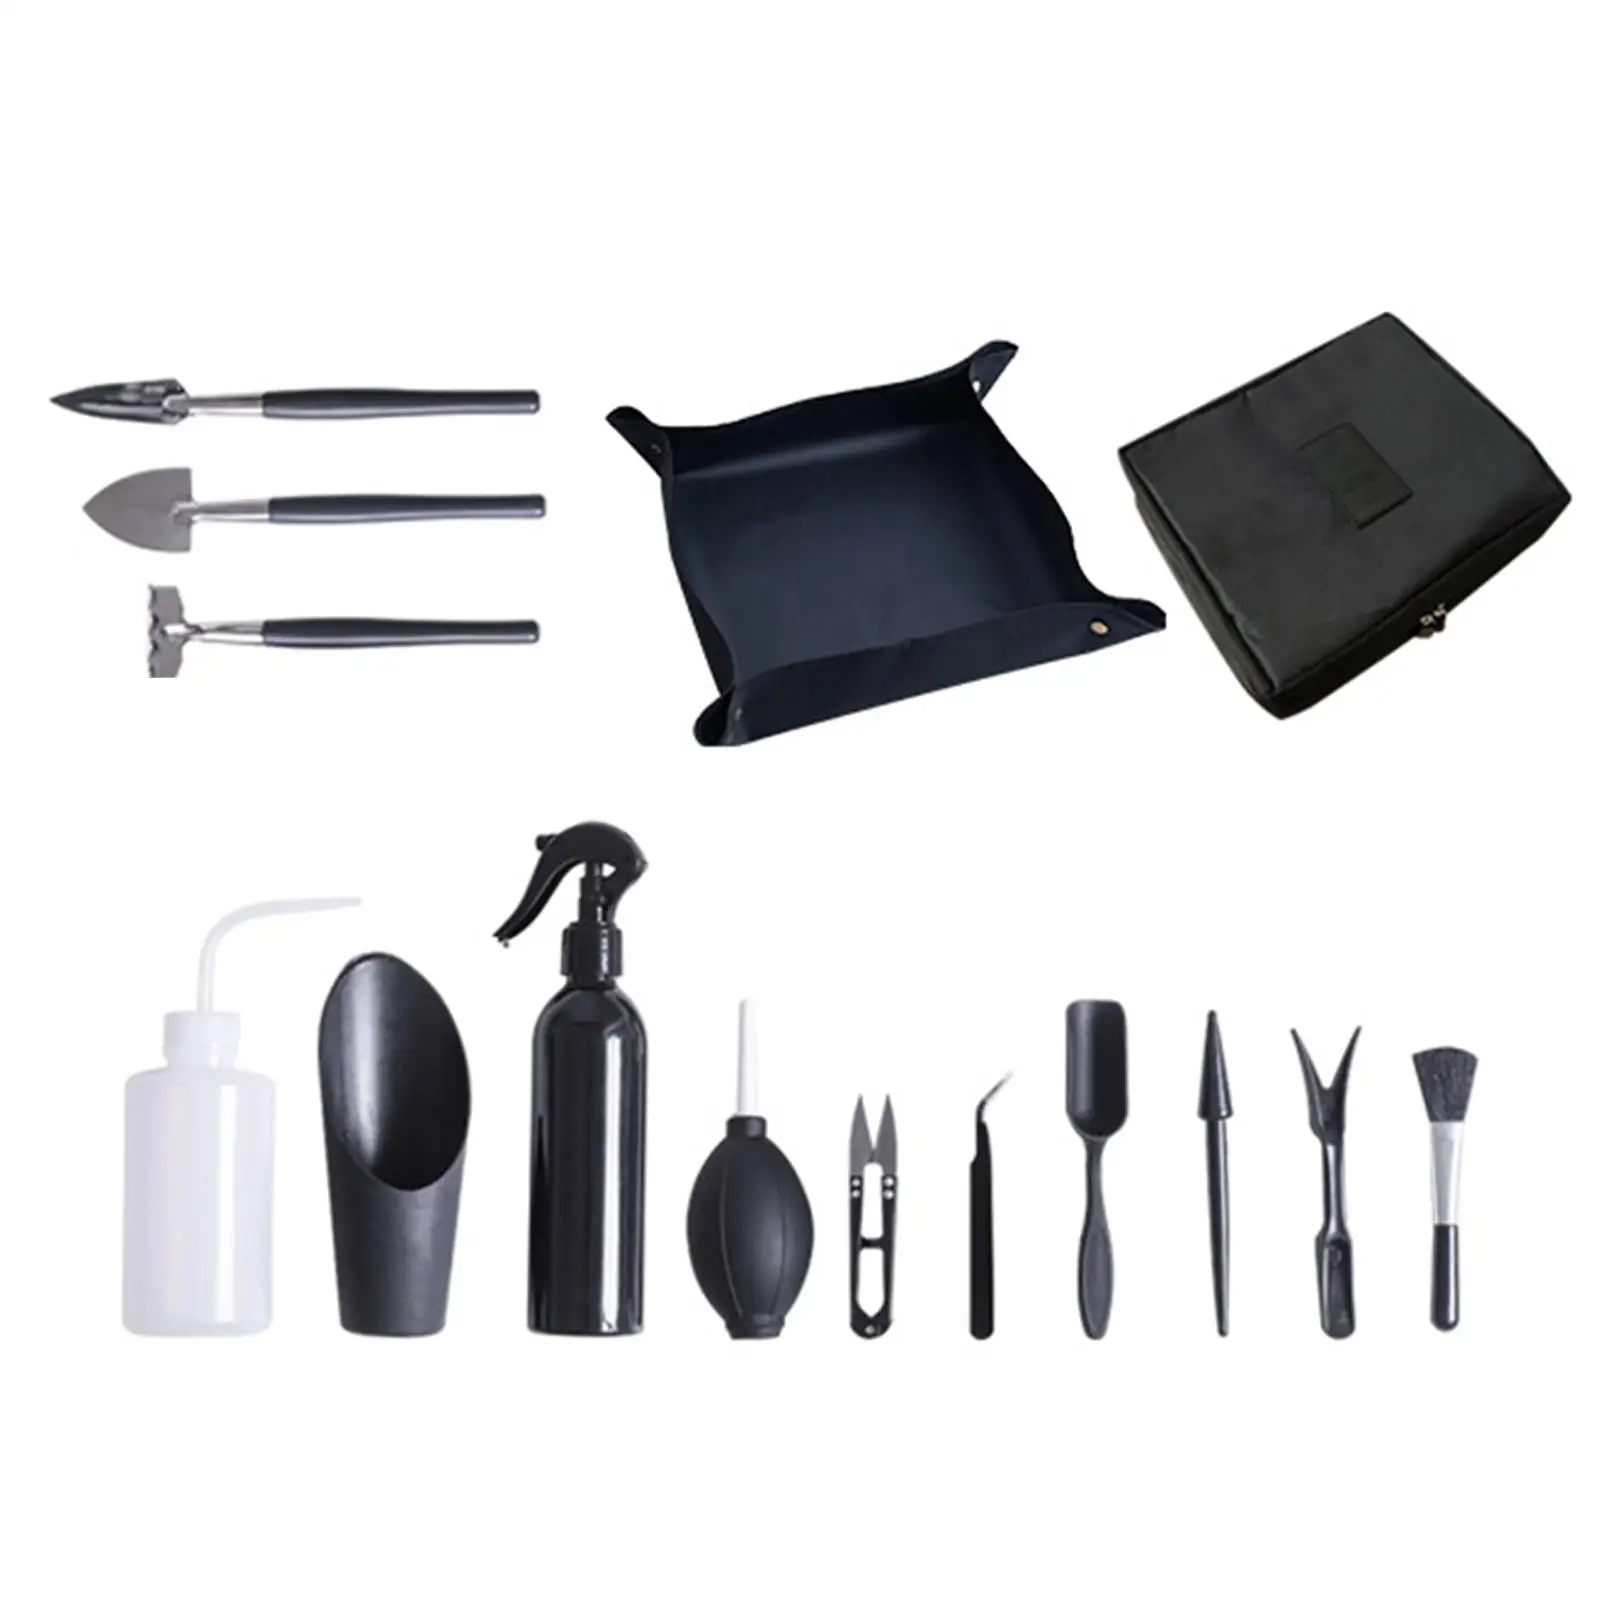 Mini Garden Succulent Transplanting Kit, 14 Pieces Set Stainless Steel, PP Materials Professional Easy to Wash Versatile Durable